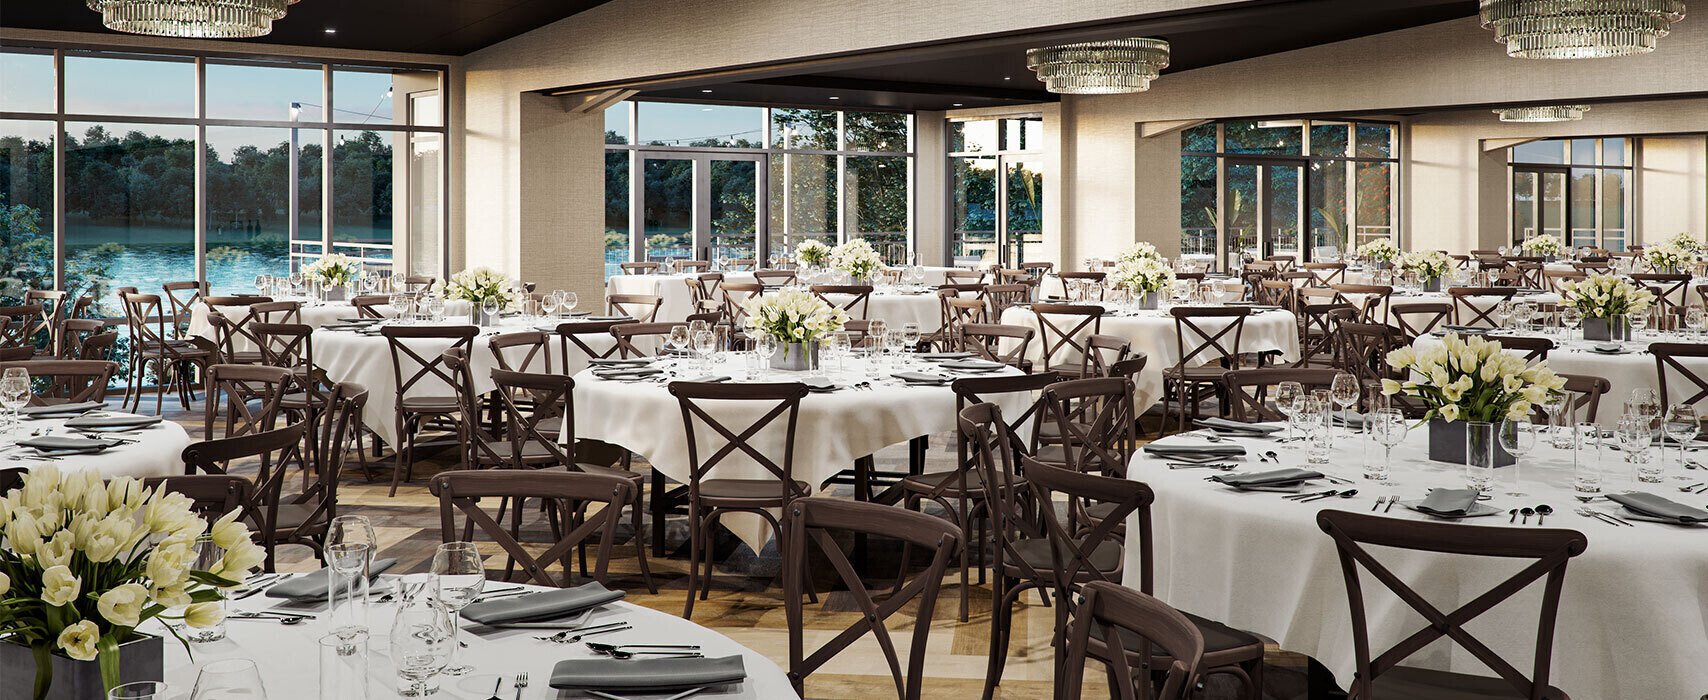 savor-at-riverhouse-event-space